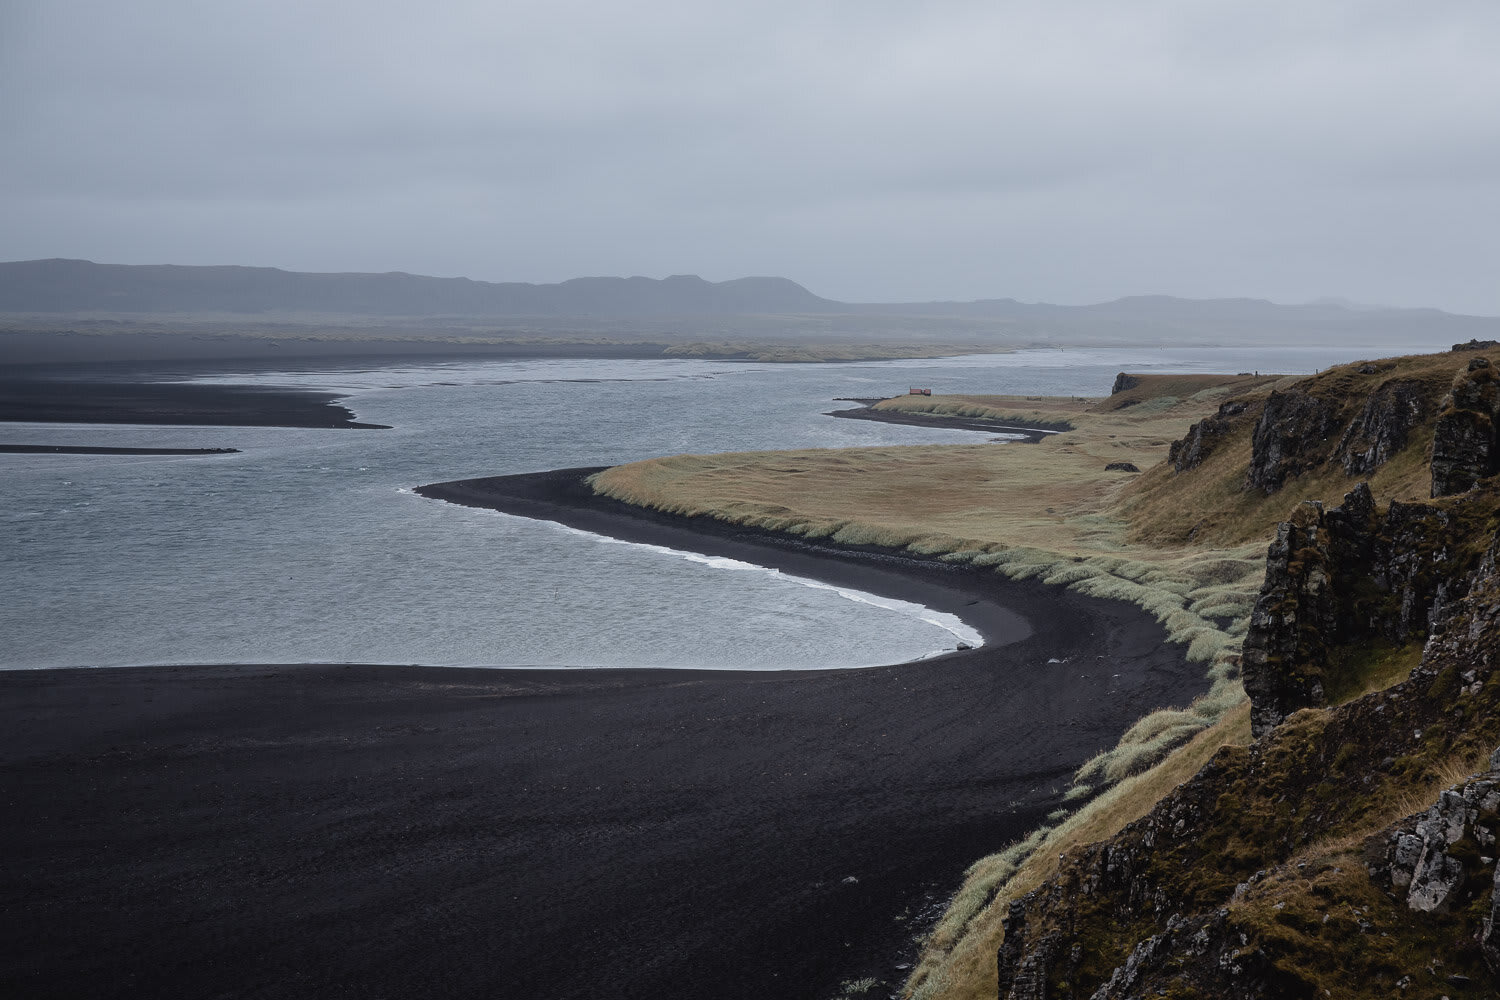 A summer adventure driving and photographing the Arctic coast Way in Iceland